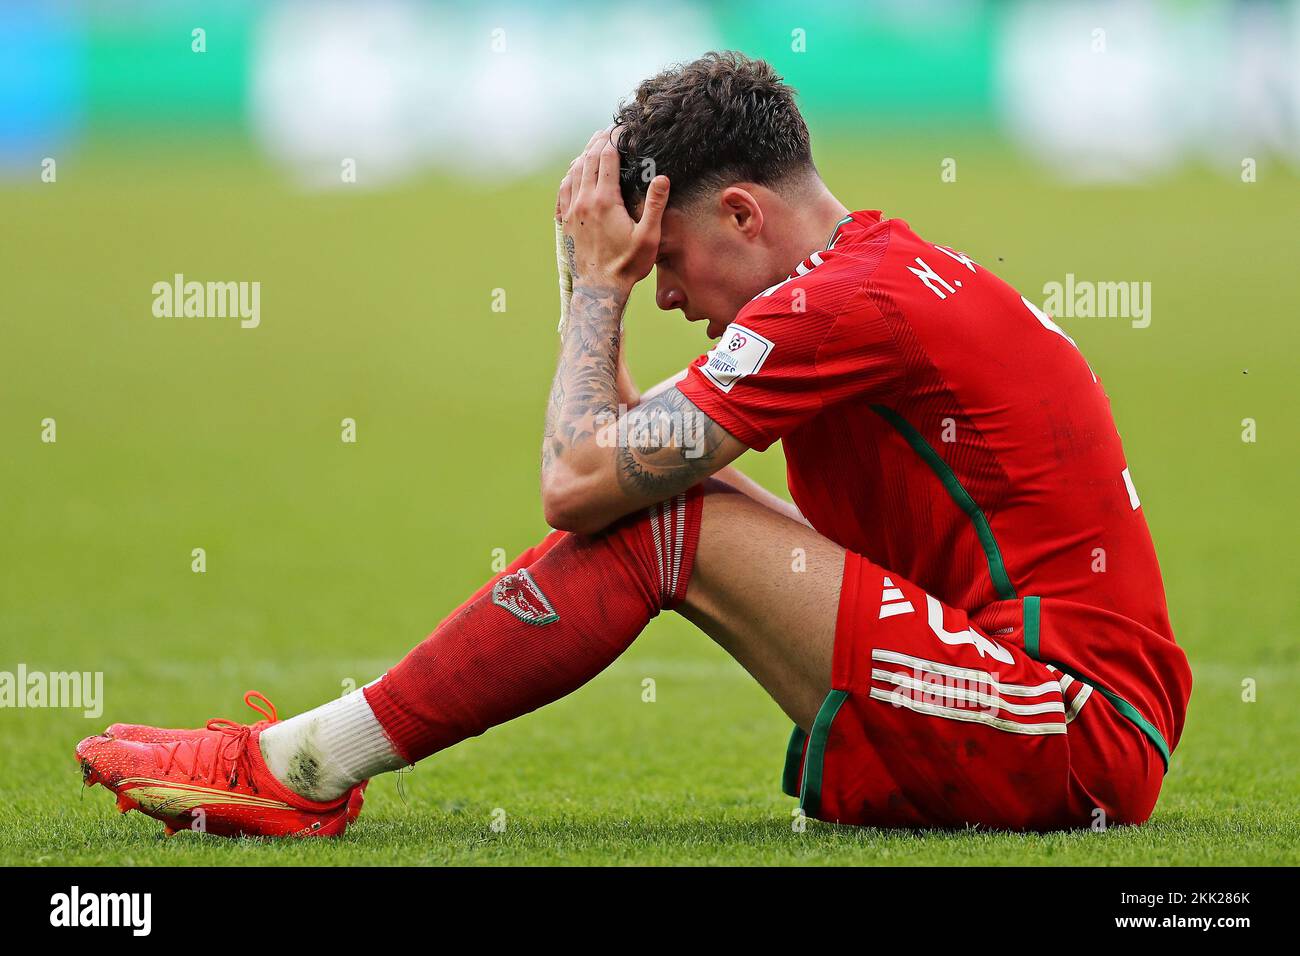 Doha, Qatar. 25th Nov, 2022. Neco Williams of Wales, regrets the goal scored by Rouzbeh Cheshmi of Iran, during the match between Wales and Iran, for the 2nd round of Group B of the FIFA World Cup Qatar 2022, Ahmed bin Ali Stadium this Friday, 25. 30761 (Heuler Andrey/SPP) Credit: SPP Sport Press Photo. /Alamy Live News Stock Photo